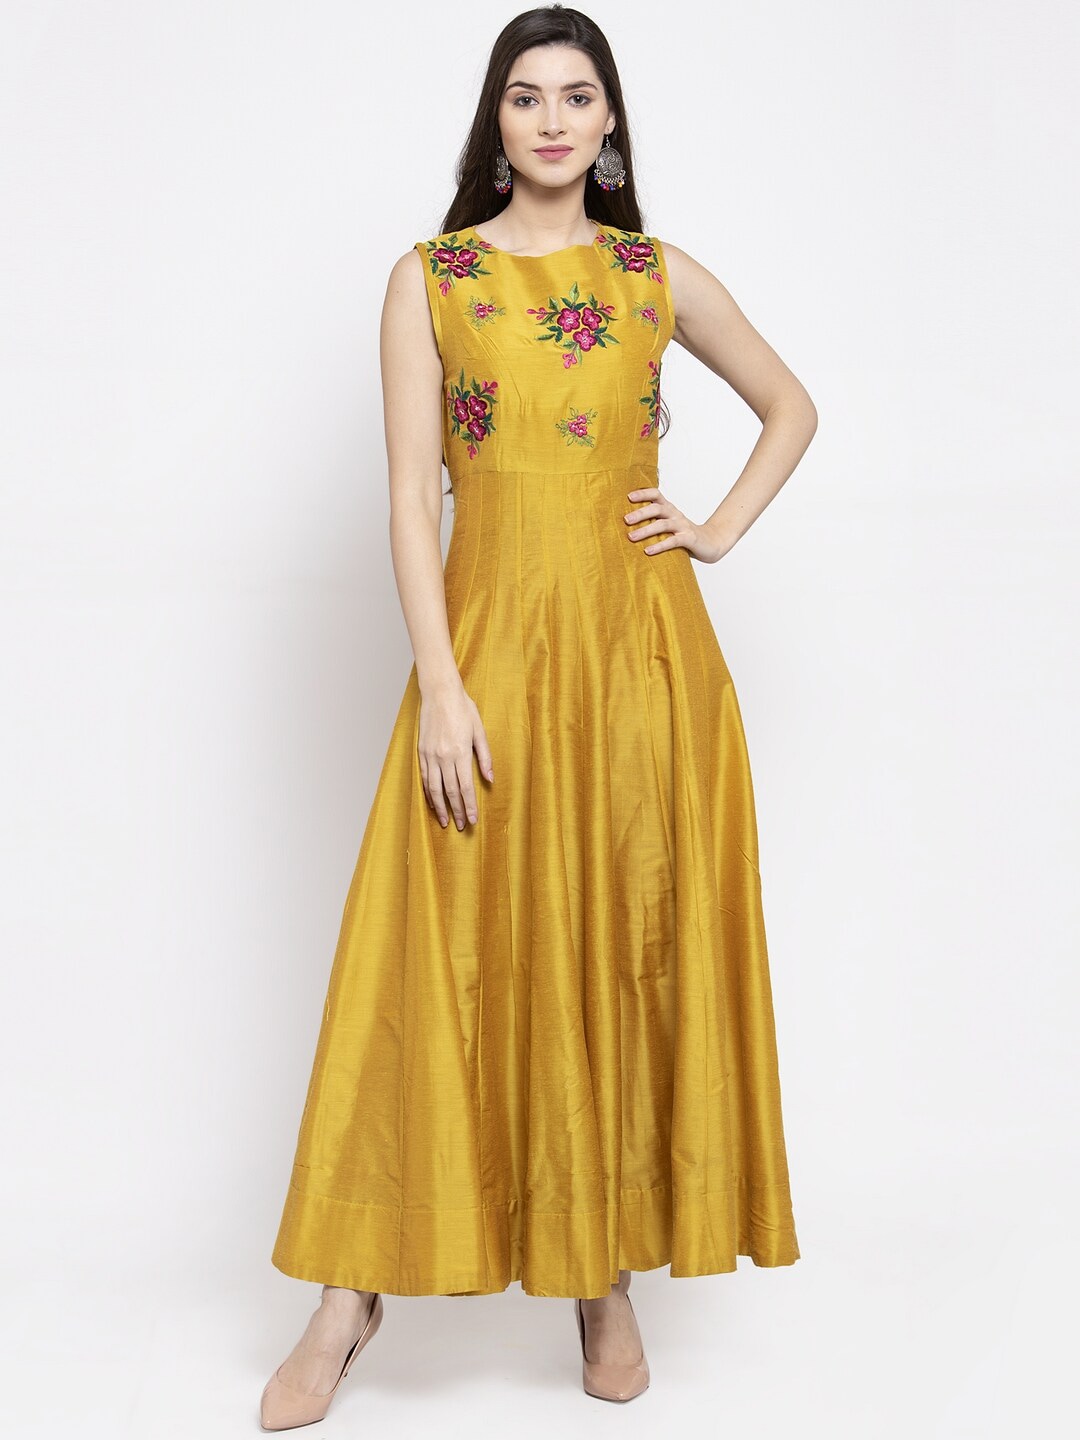 Bhama Couture Mustard Yellow Floral Ethnic Maxi Dress Price in India